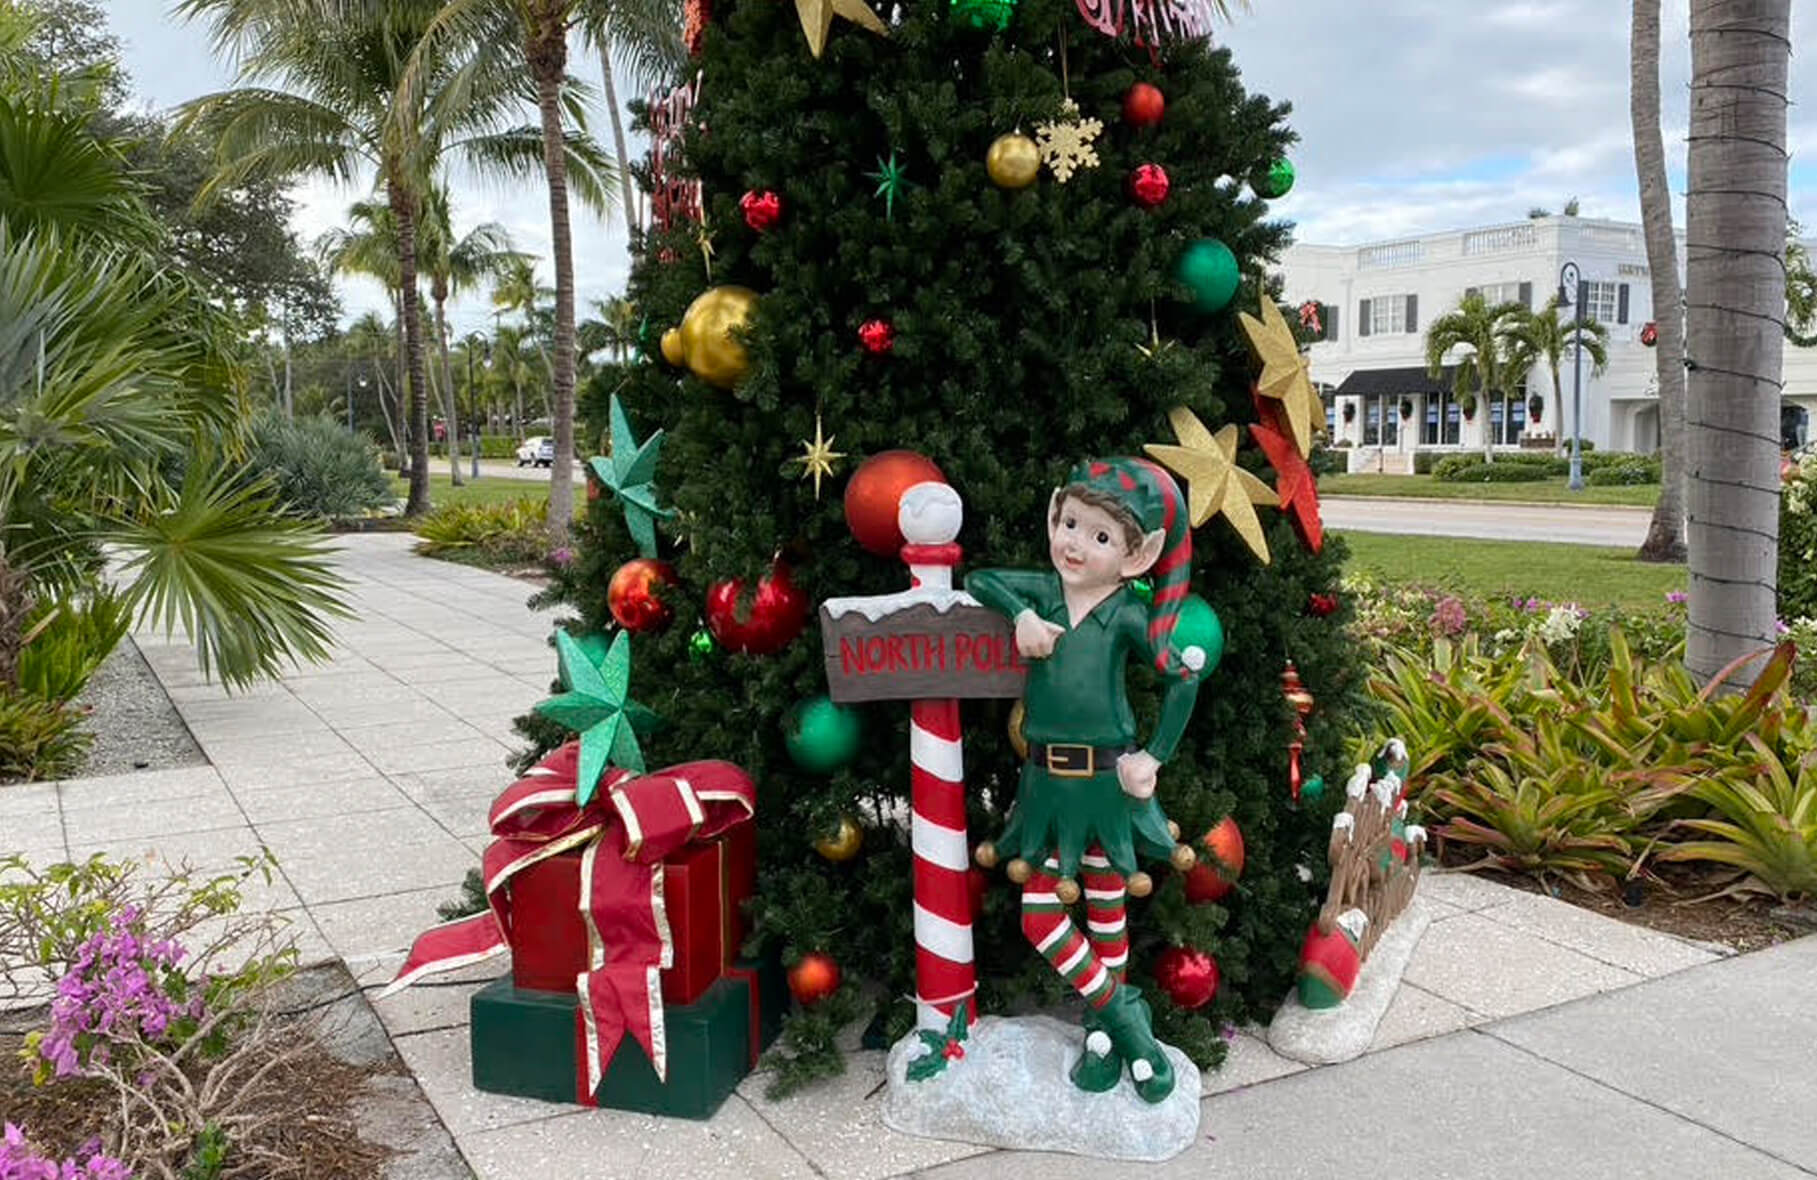 What to Do in Naples Florida - Weekend Guide - December 23 - 25, 2022